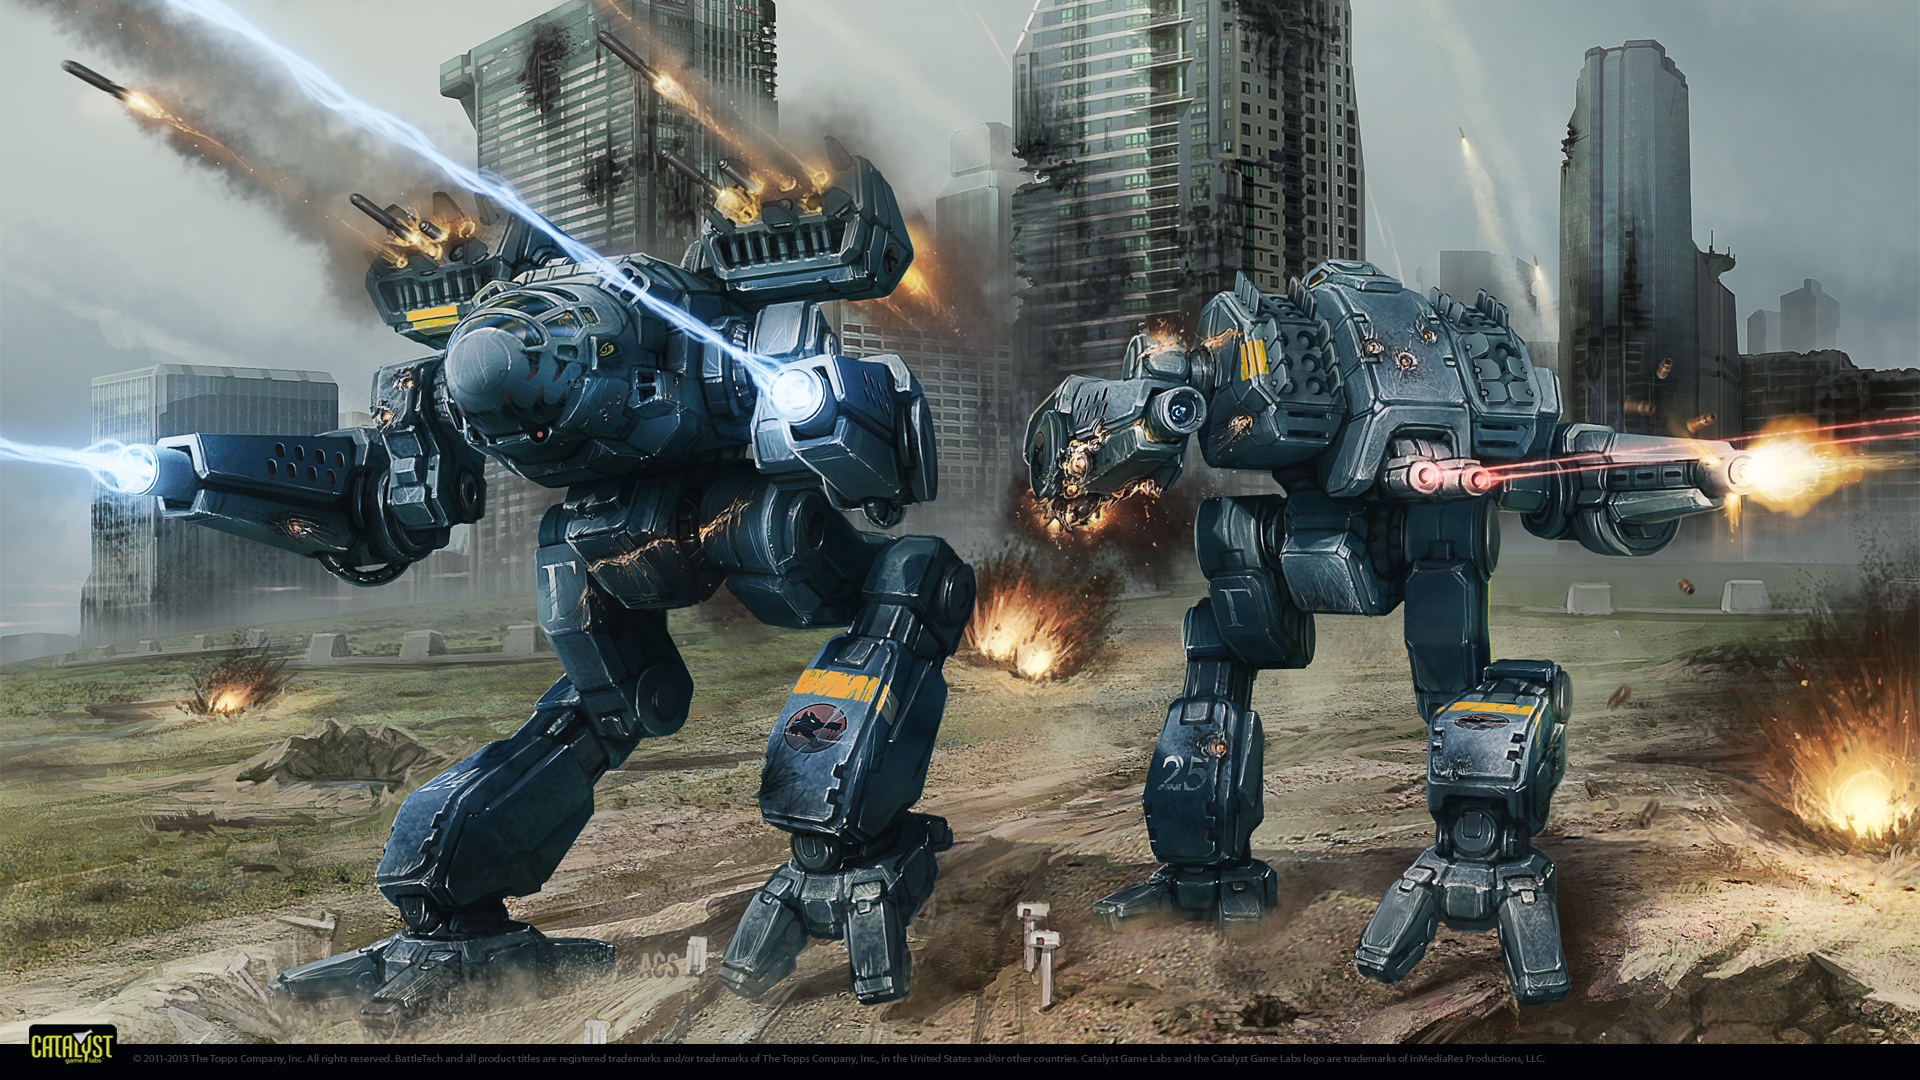 mech wallpaper,action adventure game,pc game,strategy video game,mecha,games